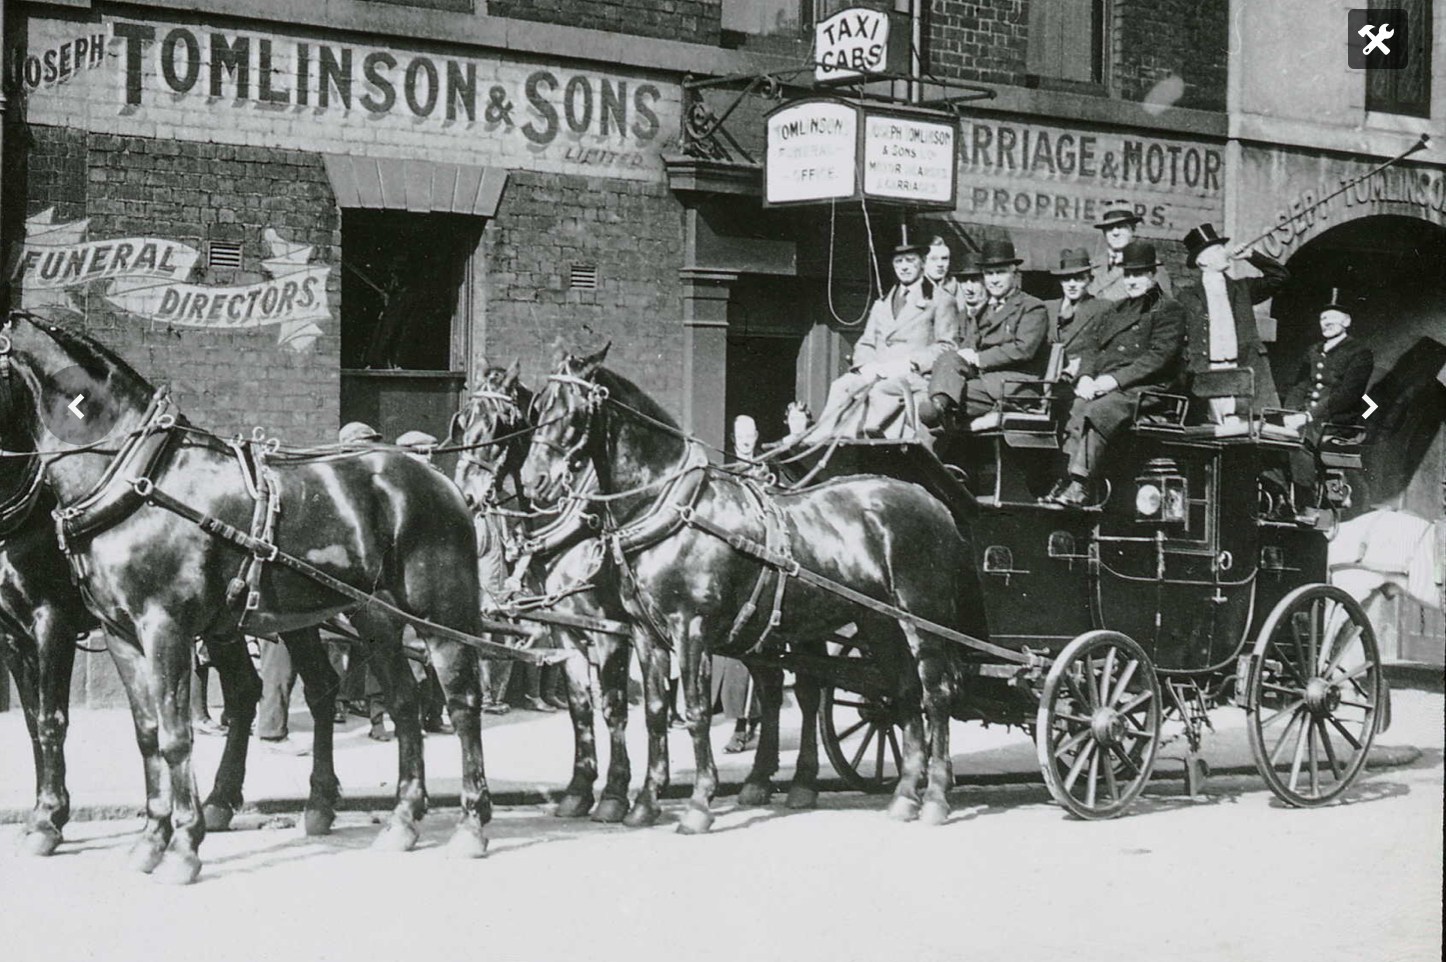 Coach and Four outside Borough Mews owned by Joseph Tomlinson & Sons Ltd